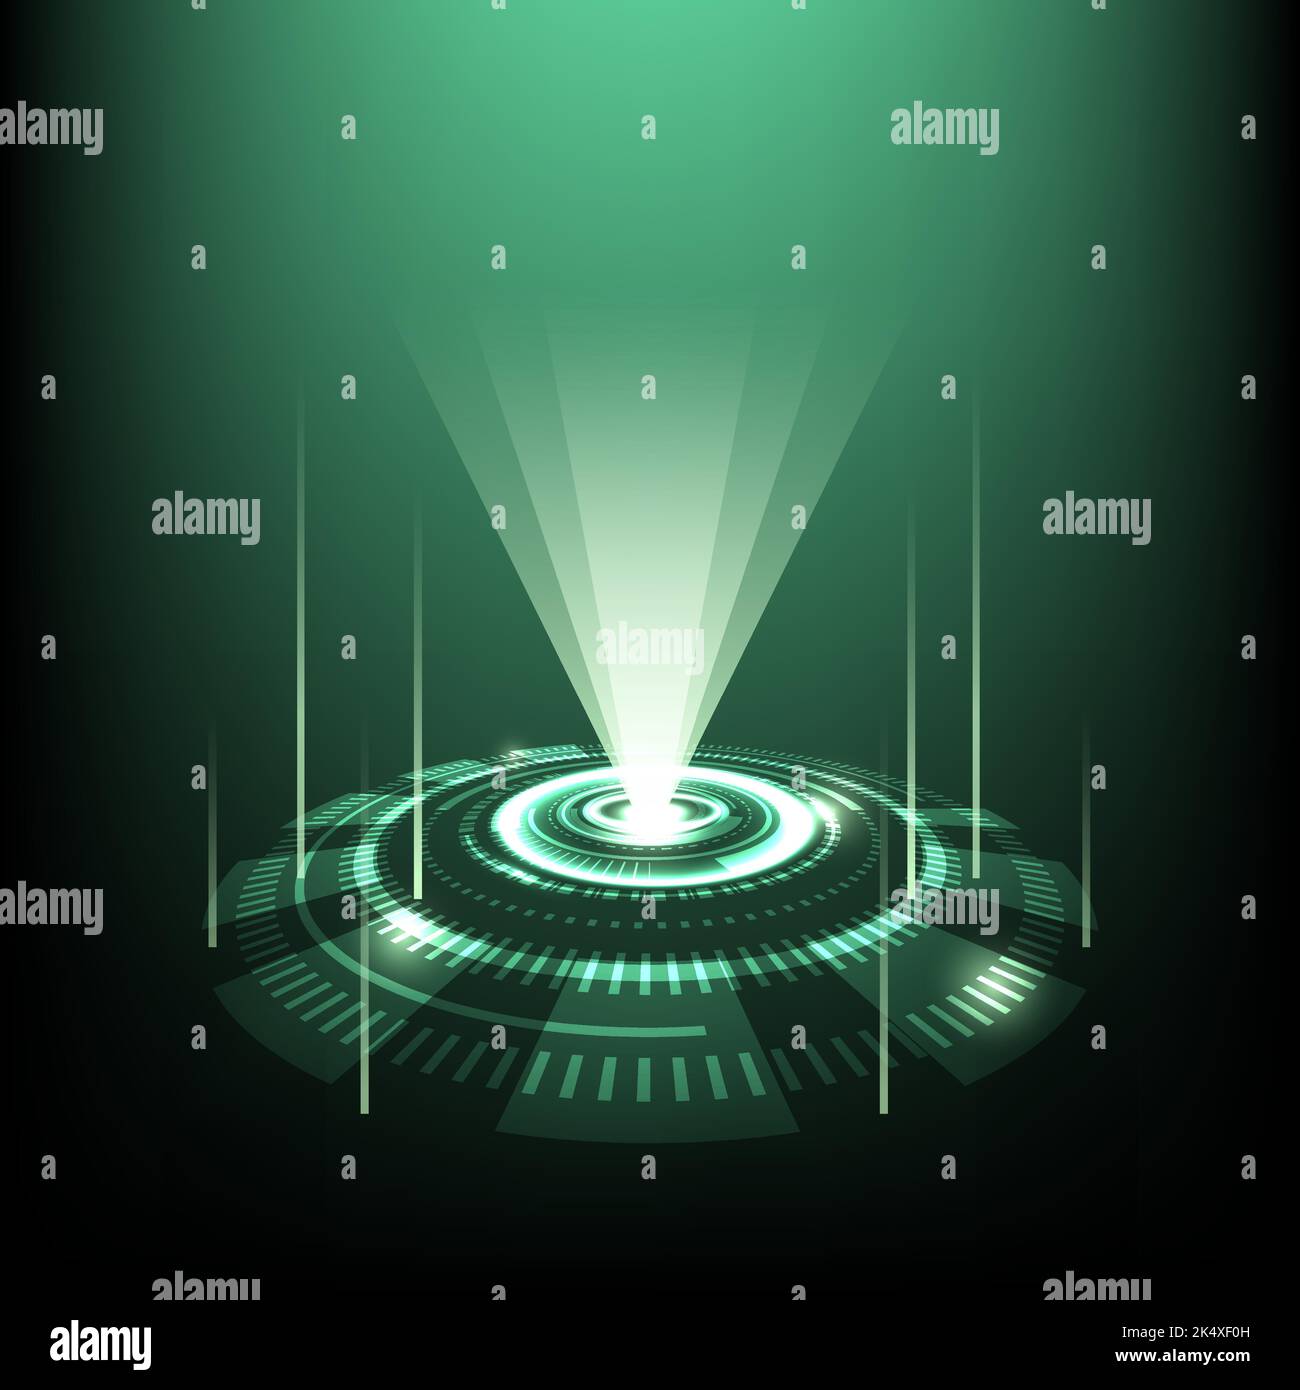 Abstract technology circle design and laser beam background. Vector illustration. Stock Vector